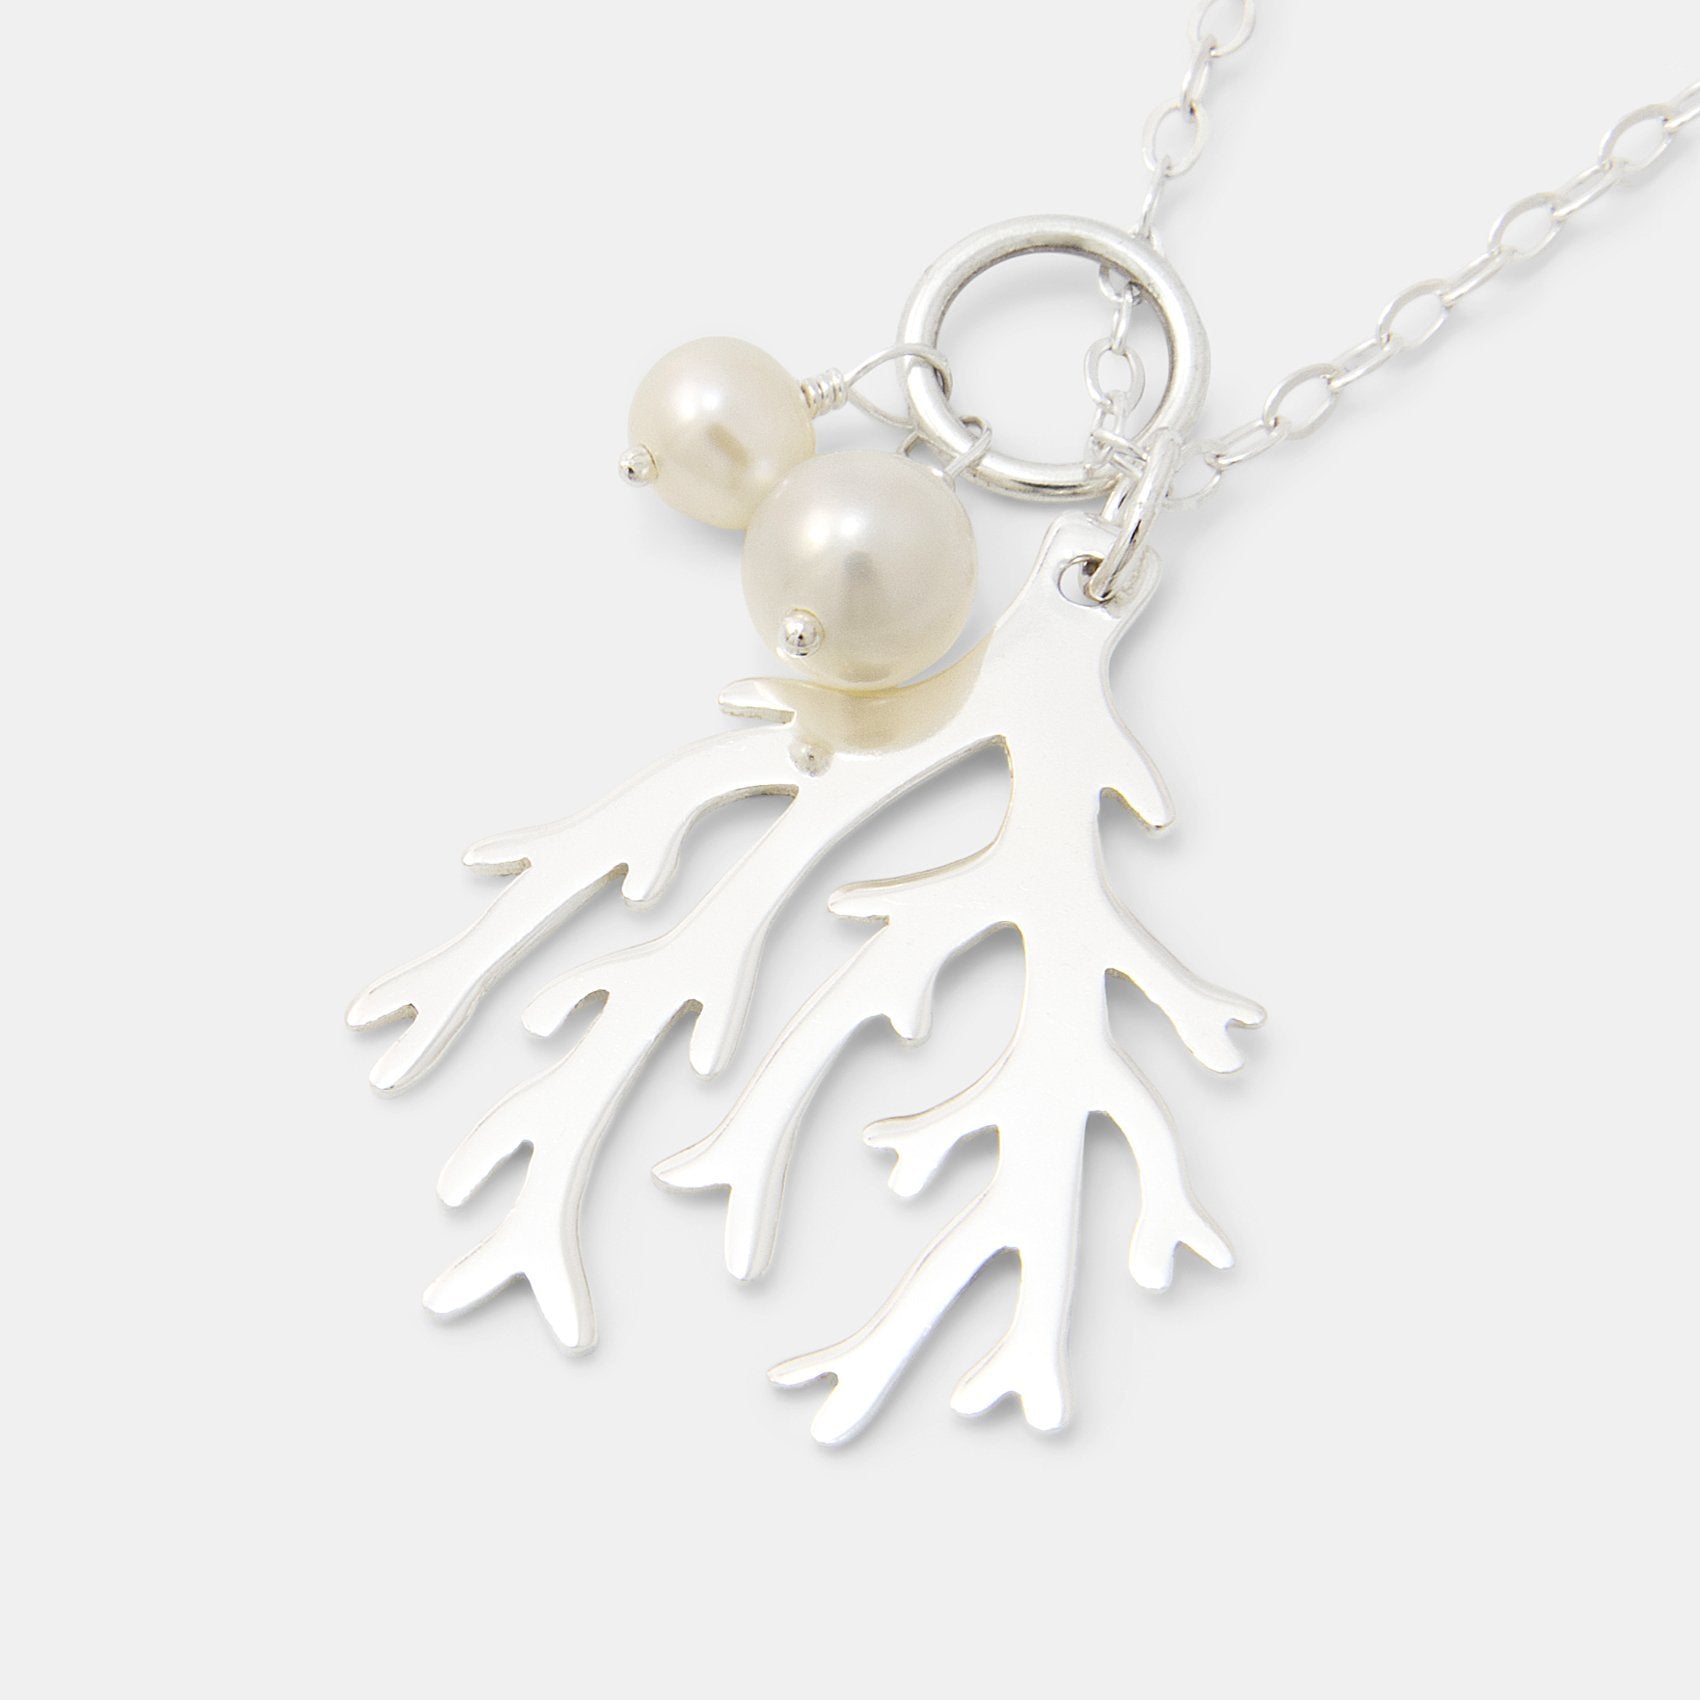 Branch coral & pearls silver pendant necklace - Simone Walsh Jewellery Australia